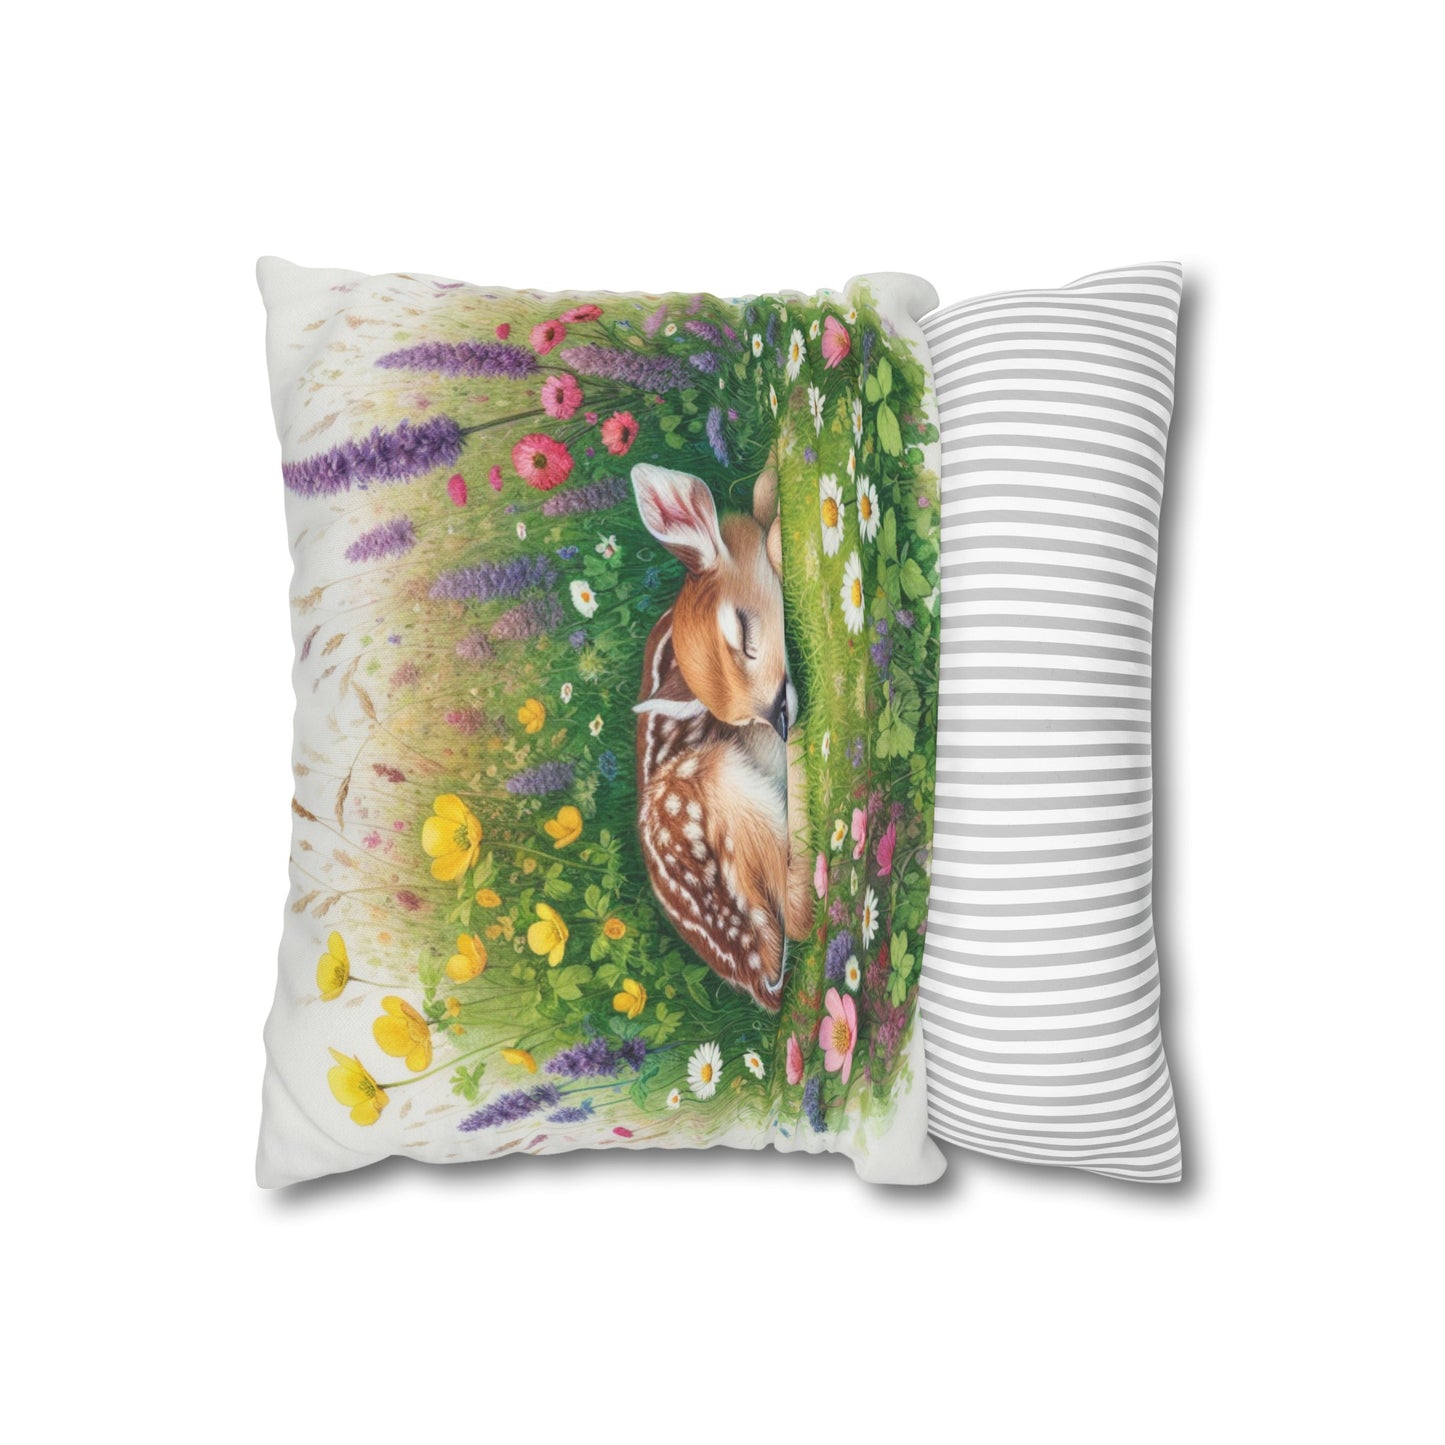 Asleep In The Meadow - Fawn Cushion Cover